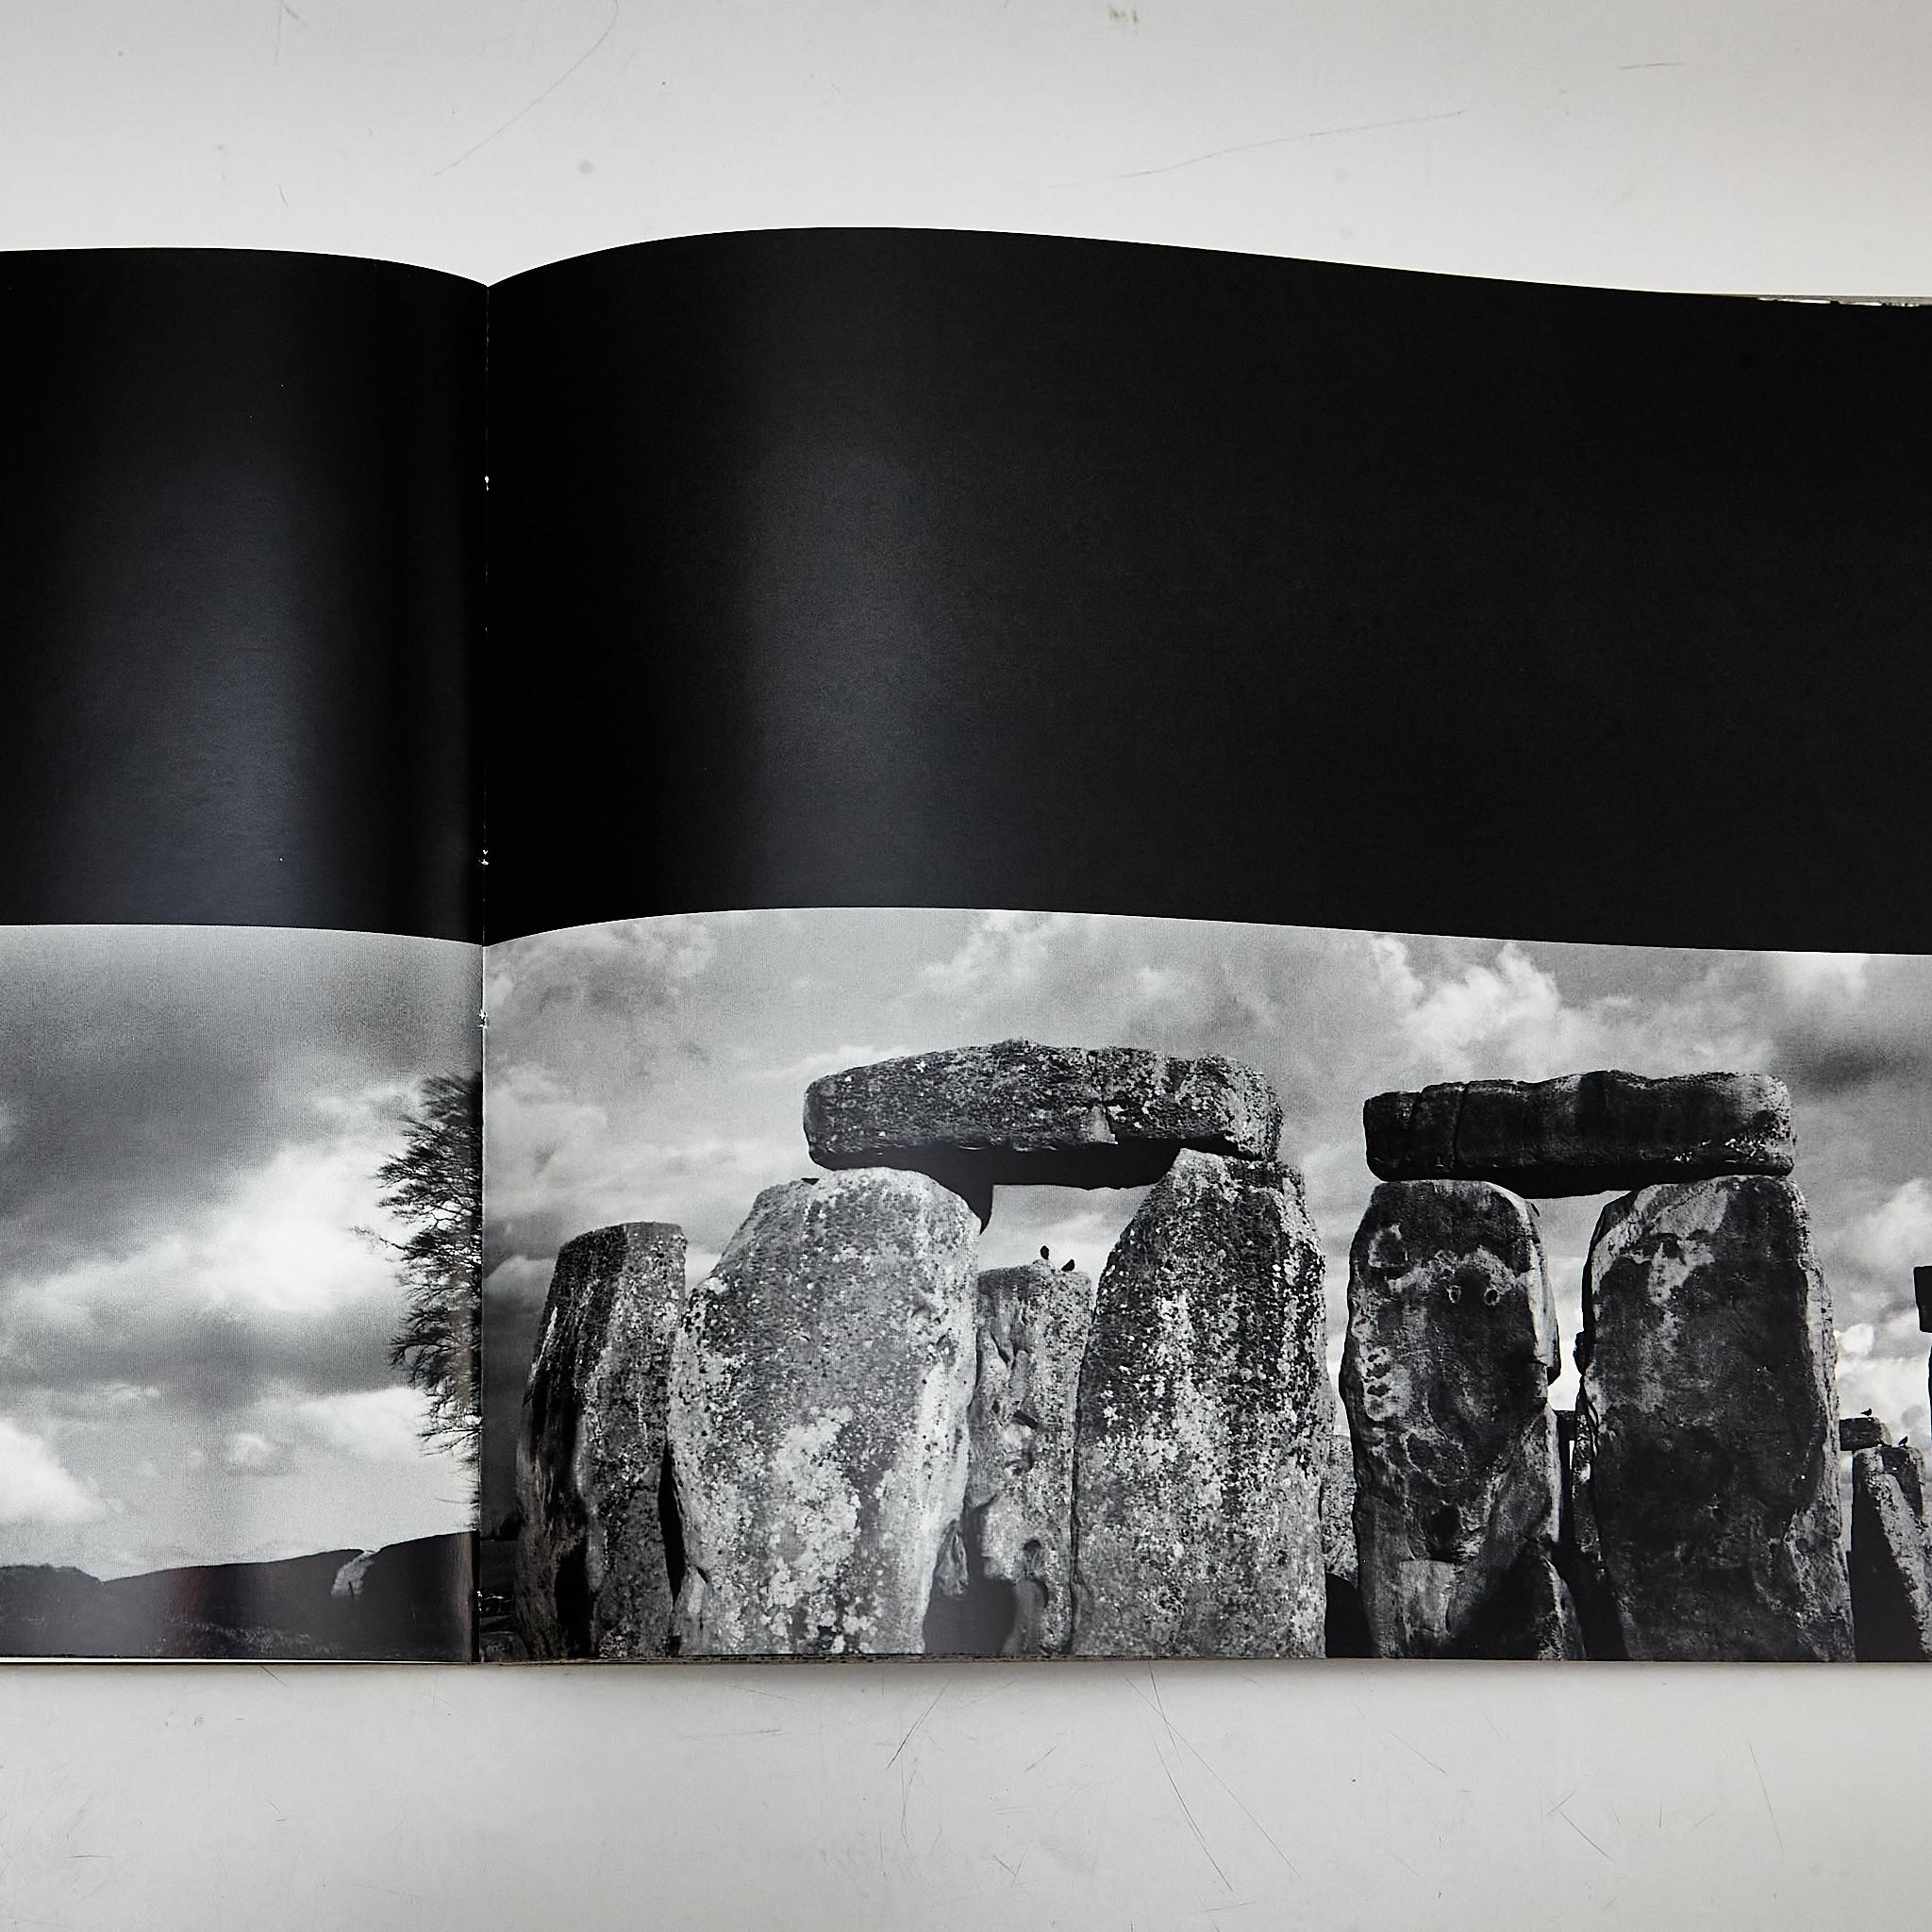 Paper Terra: Miquel Arnal's Stunning Photo Book For Sale